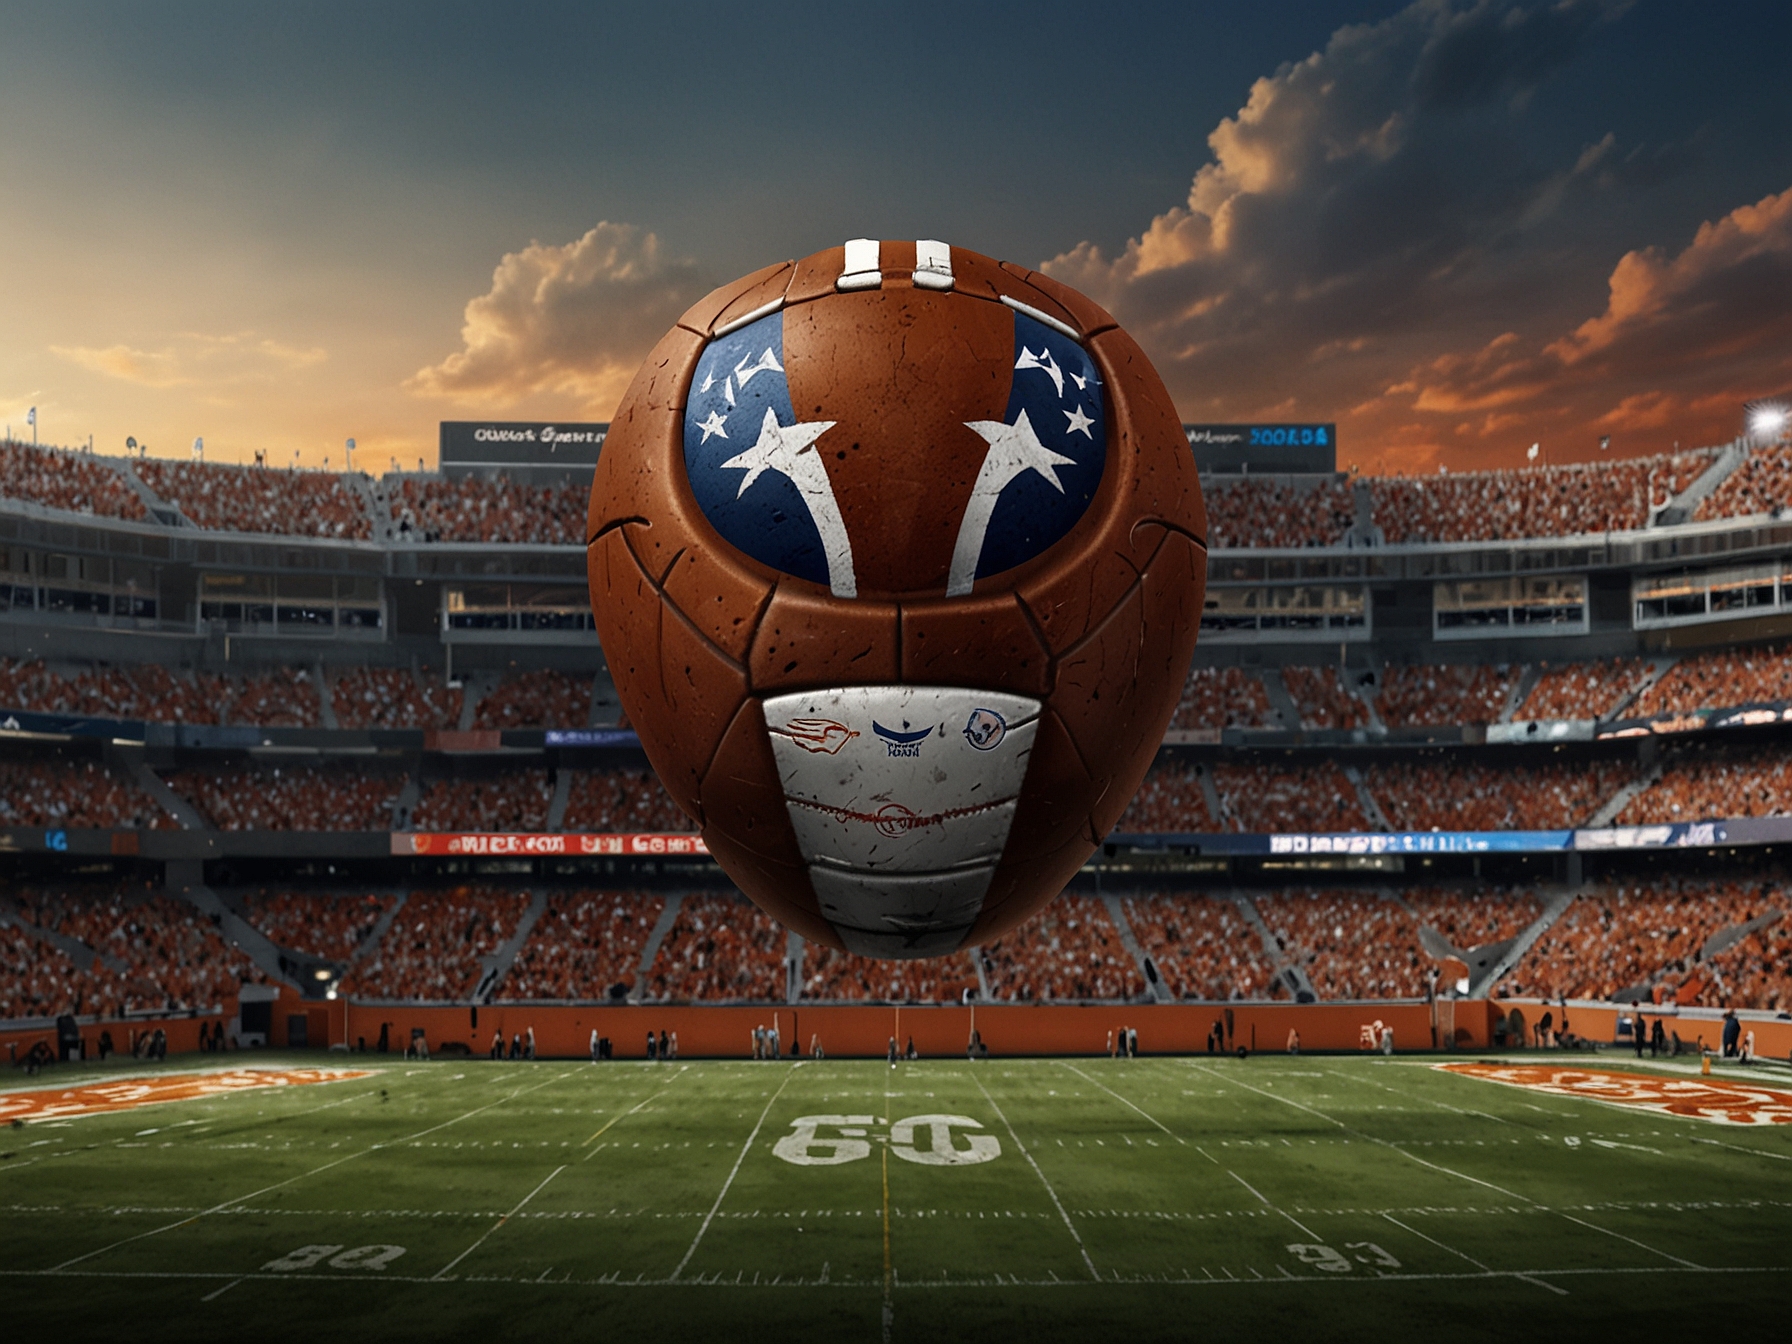 Graphic of a football game featuring Texas and Oklahoma teams set against the backdrop of the SEC logo, highlighting the new and intense rivalries these schools will face in their upcoming seasons.